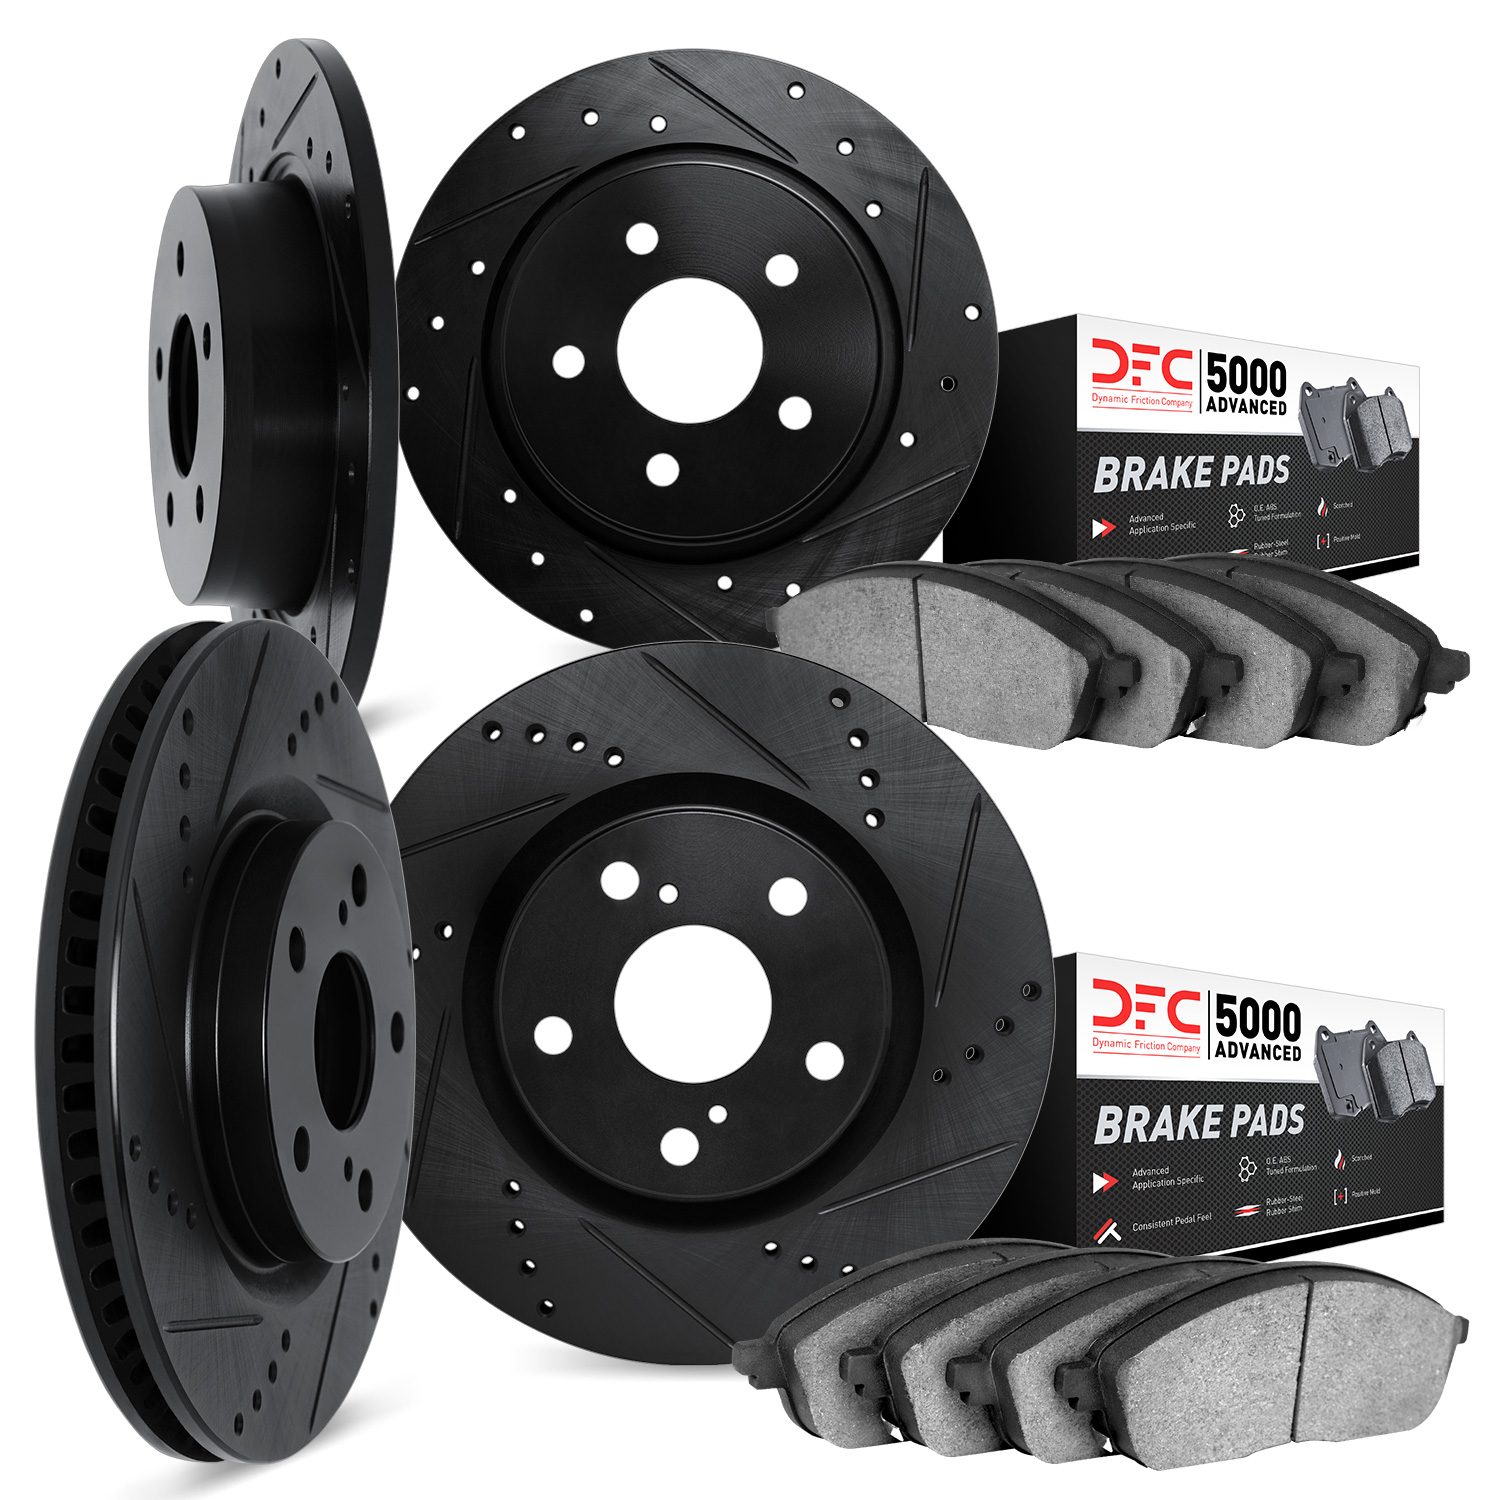 8504-58007 Drilled/Slotted Brake Rotors w/5000 Advanced Brake Pads Kit [Black], 2017-2020 Acura/Honda, Position: Front and Rear